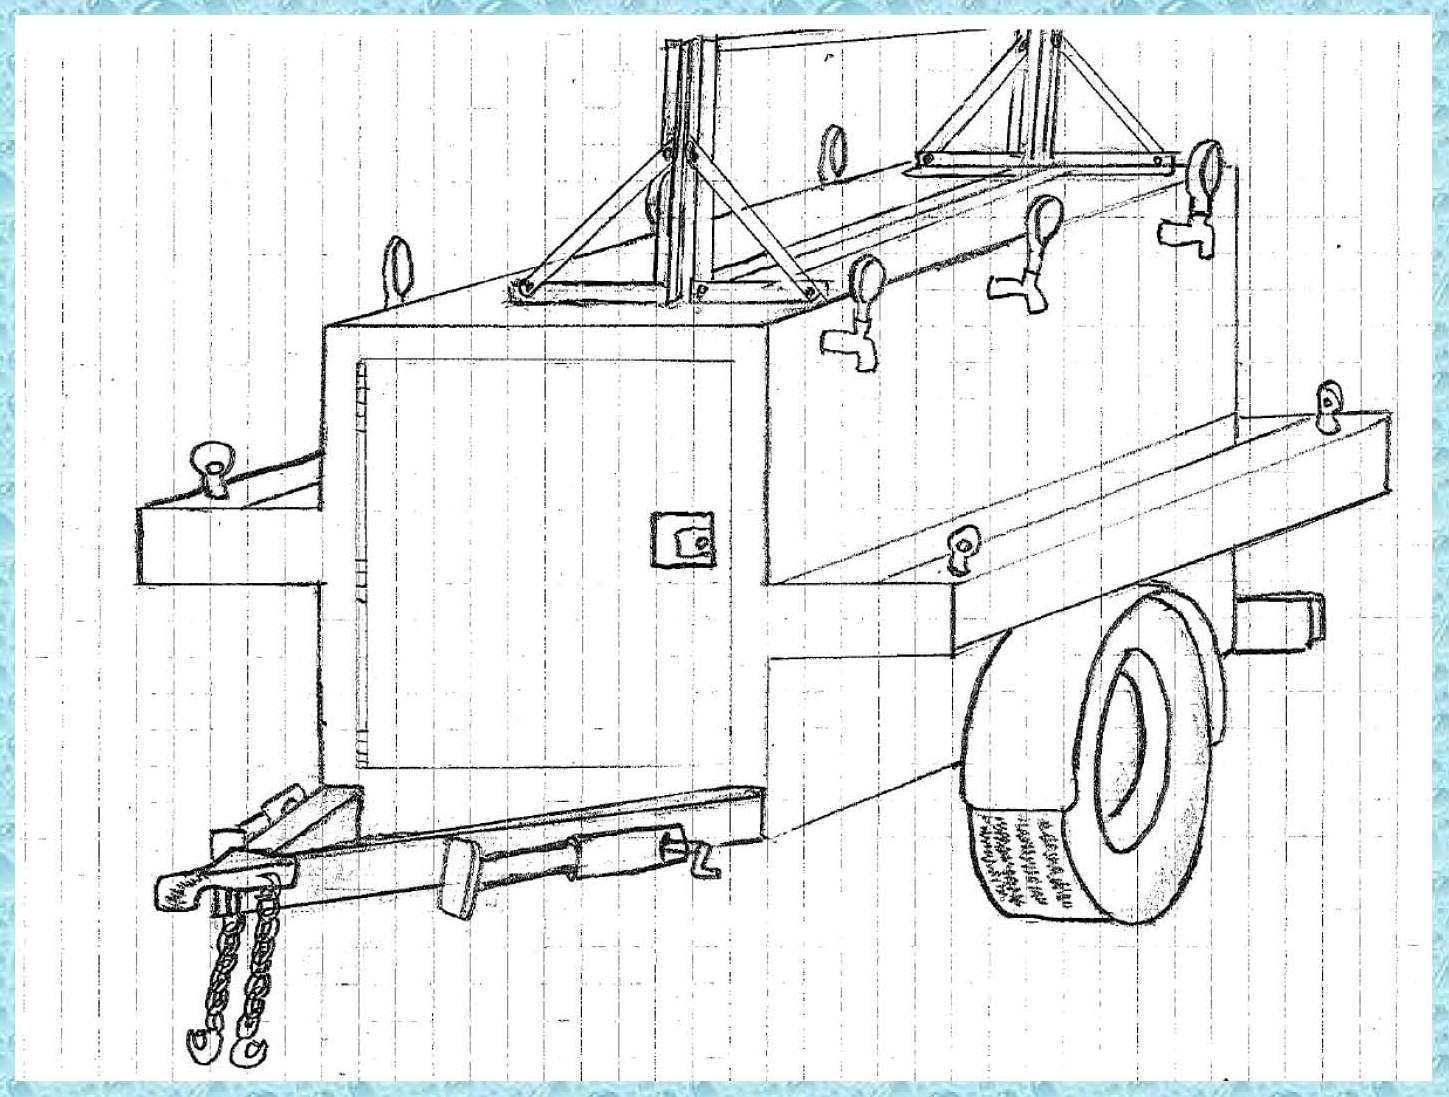 Crude first sketch of Water Wagon concept.